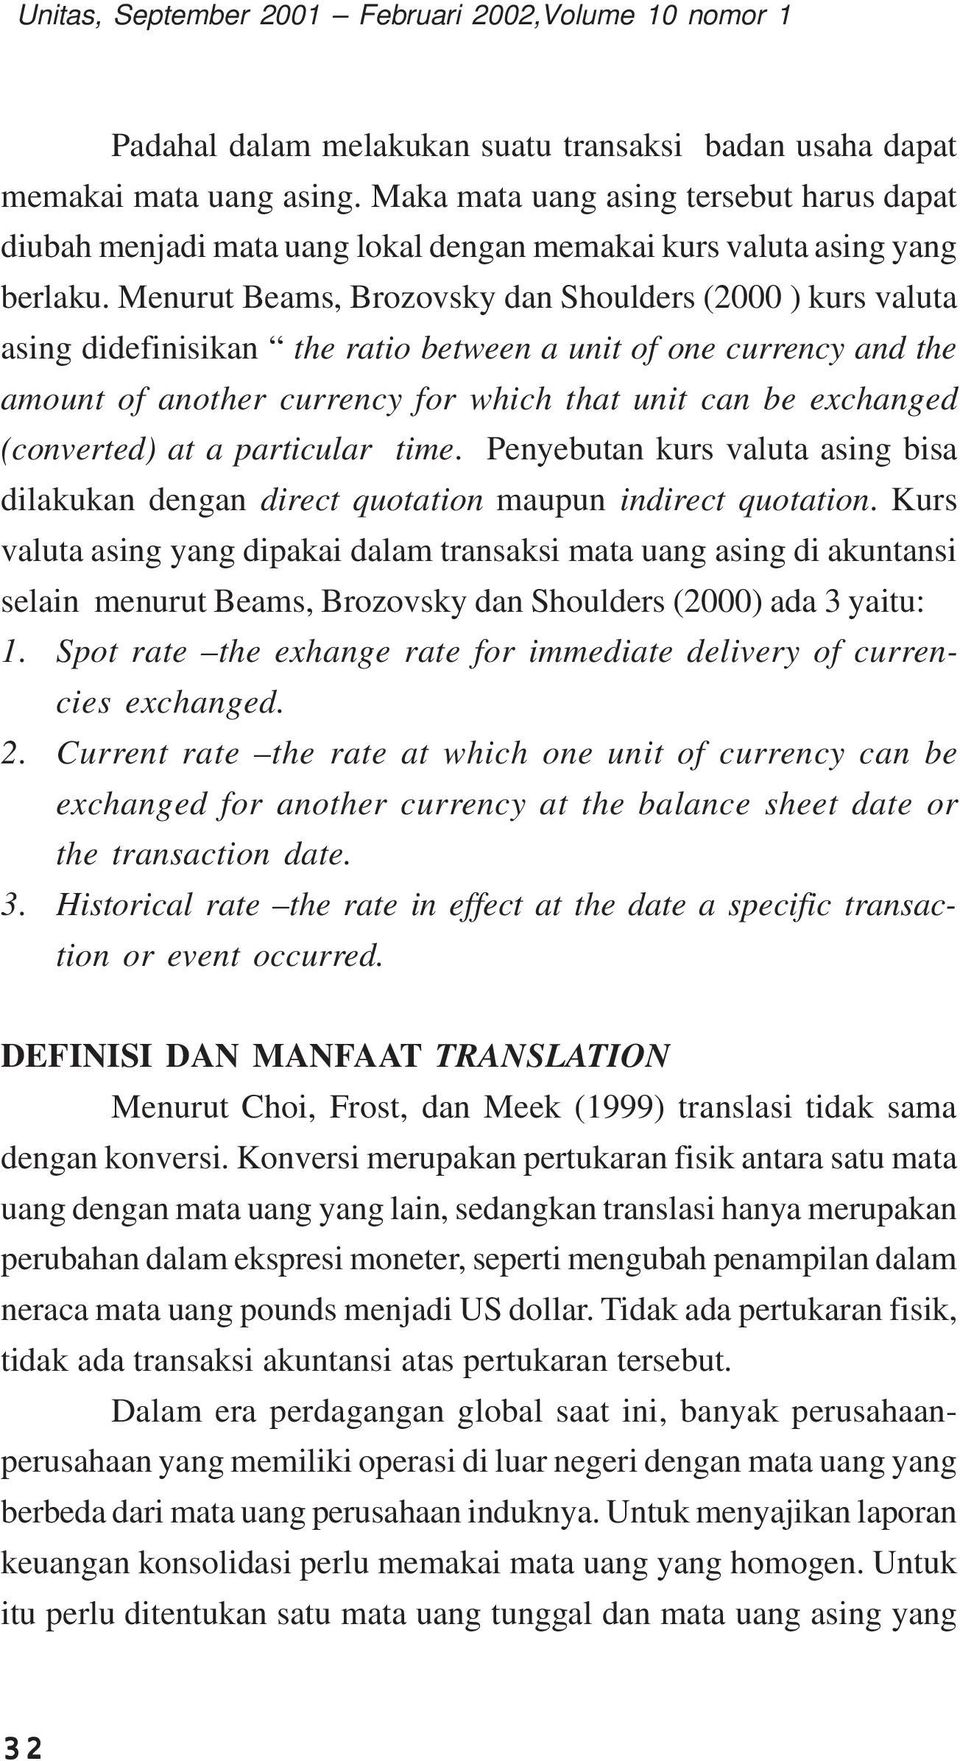 Menurut Beams, Brozovsky dan Shoulders (2000 ) kurs valuta asing didefinisikan the ratio between a unit of one currency and the amount of another currency for which that unit can be exchanged